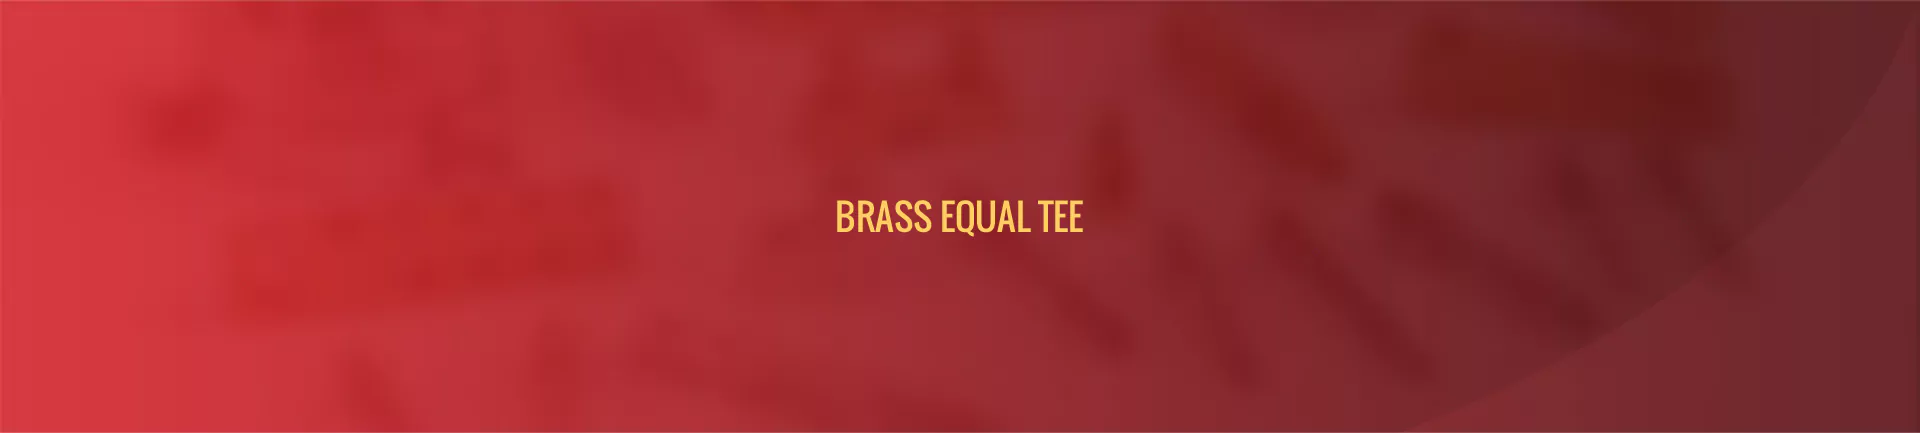 brass_equal_tee-banner